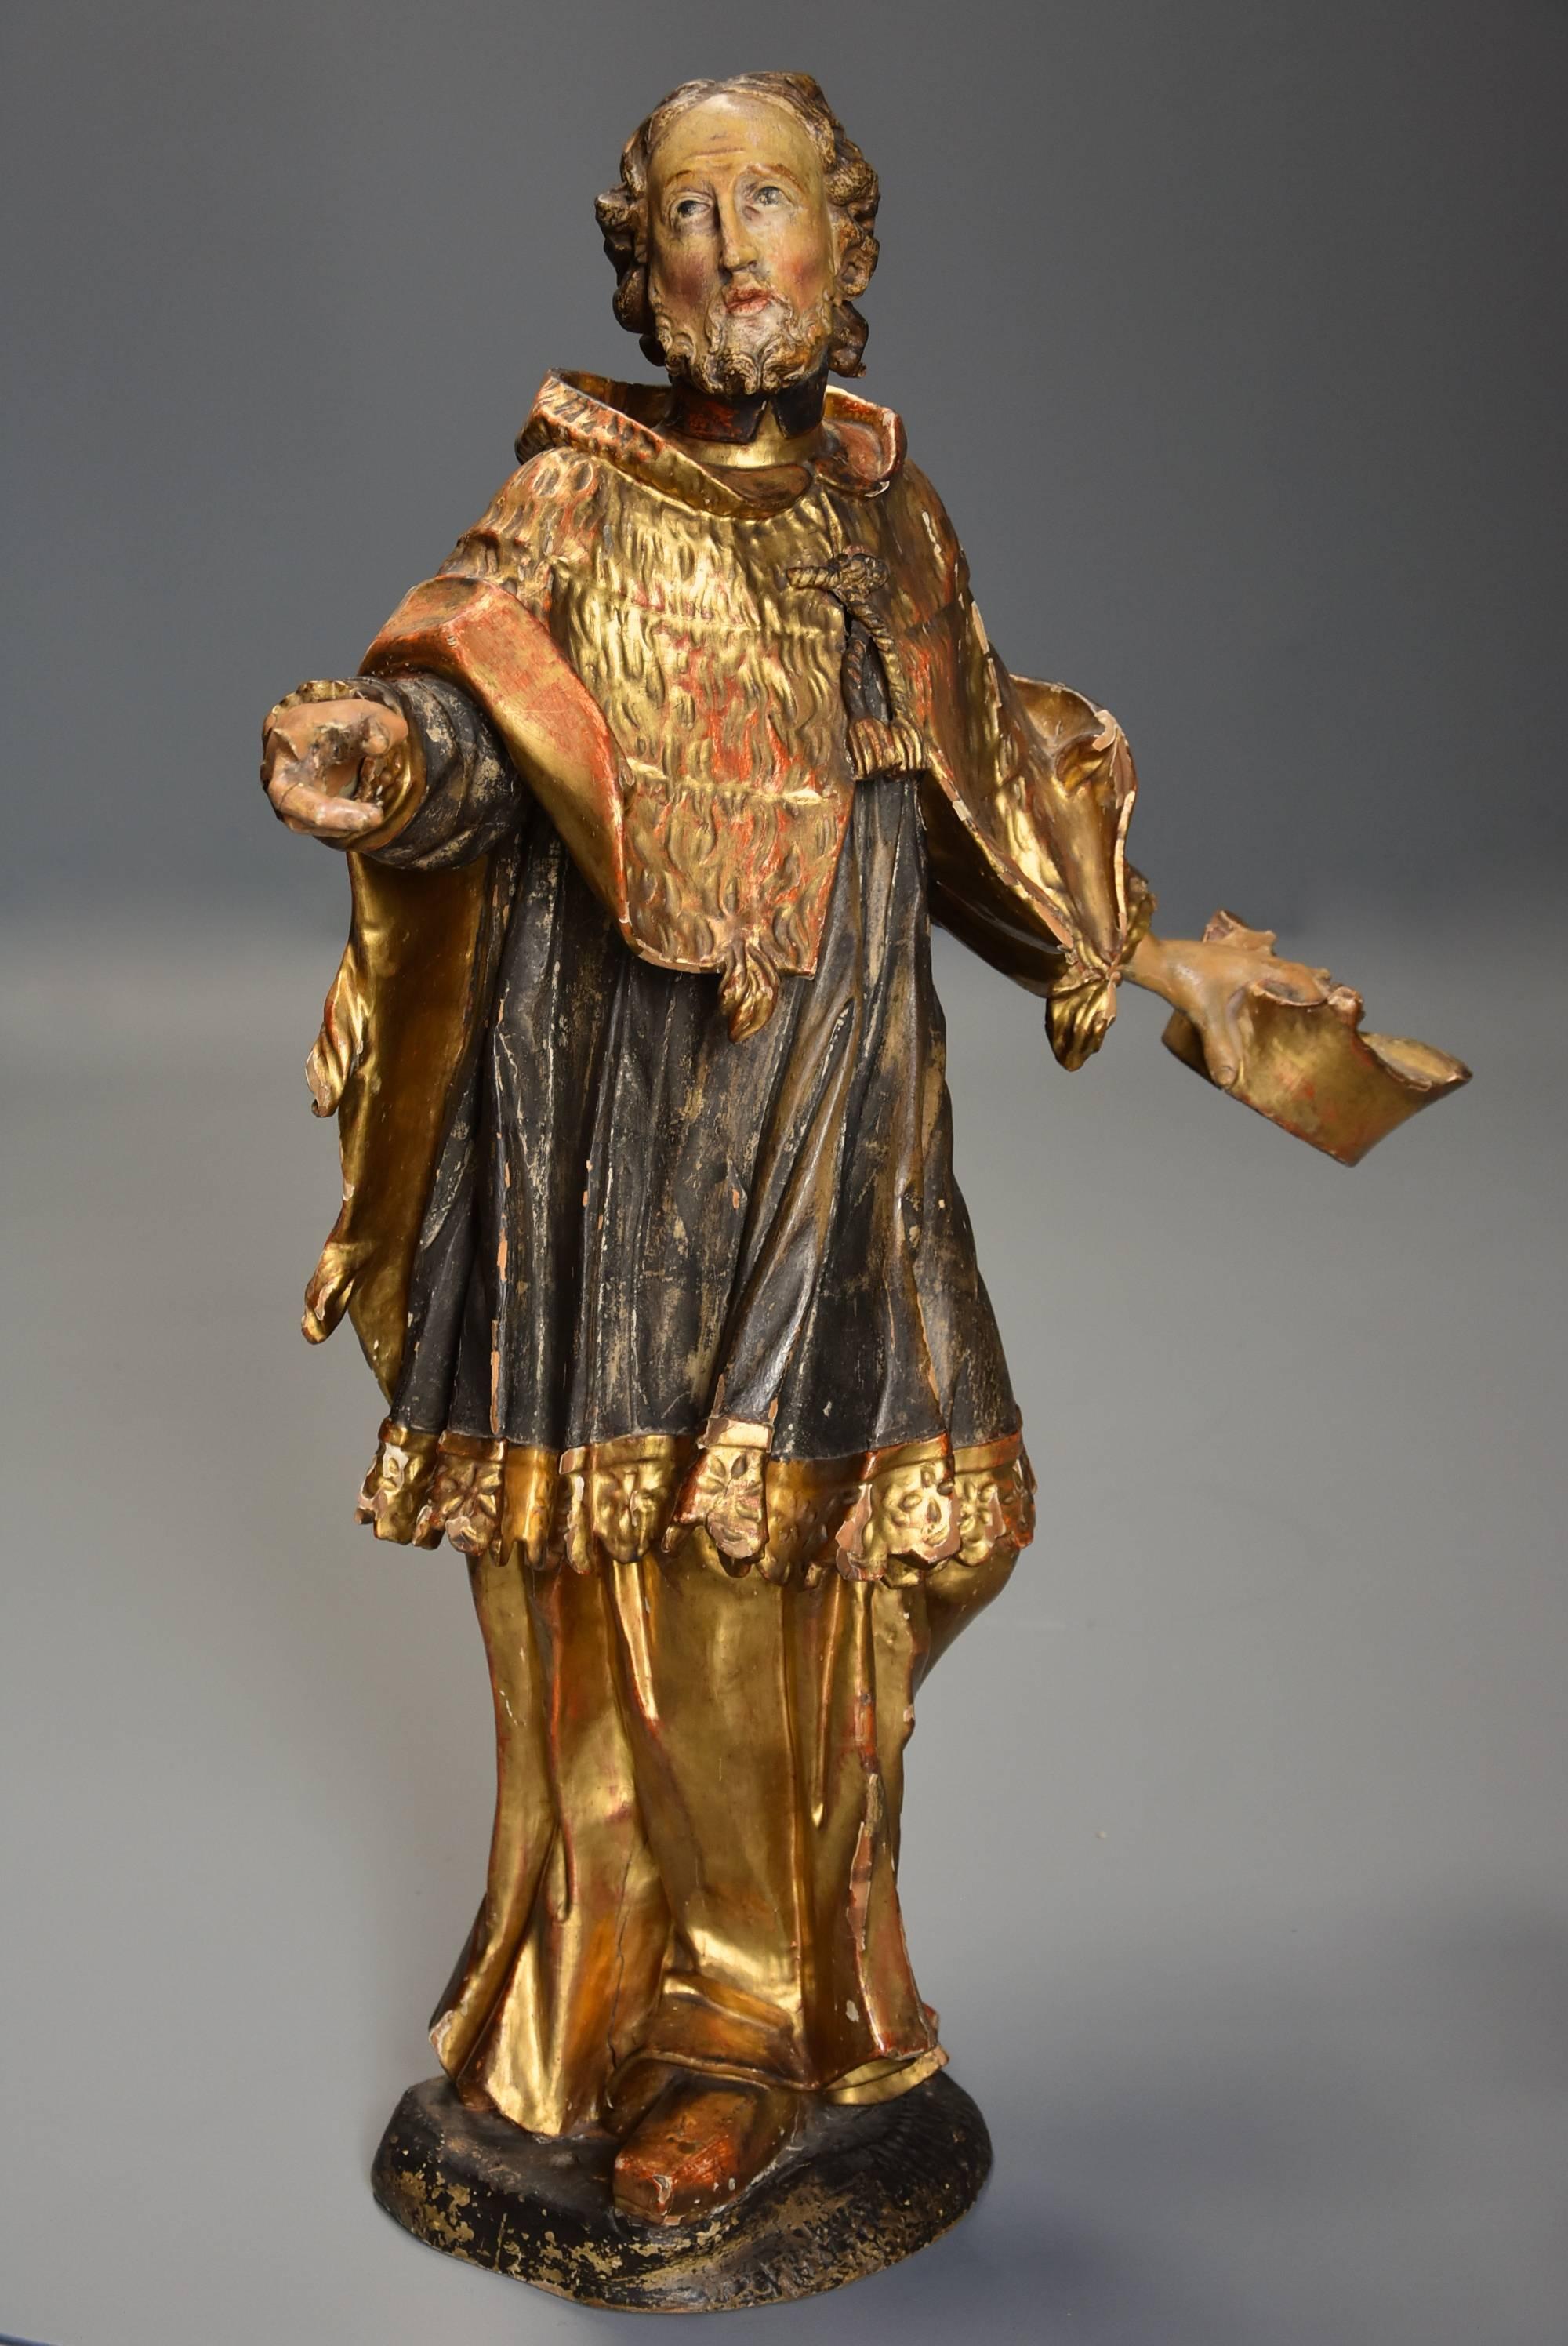 A superbly carved and highly decorative 18th century (circa 1760) Continental polychrome and gilt figure of Saint Peter.

This carved figure depicts St Peter standing in his gold and blue robes with textured gold cloak holding a hat, possibly his